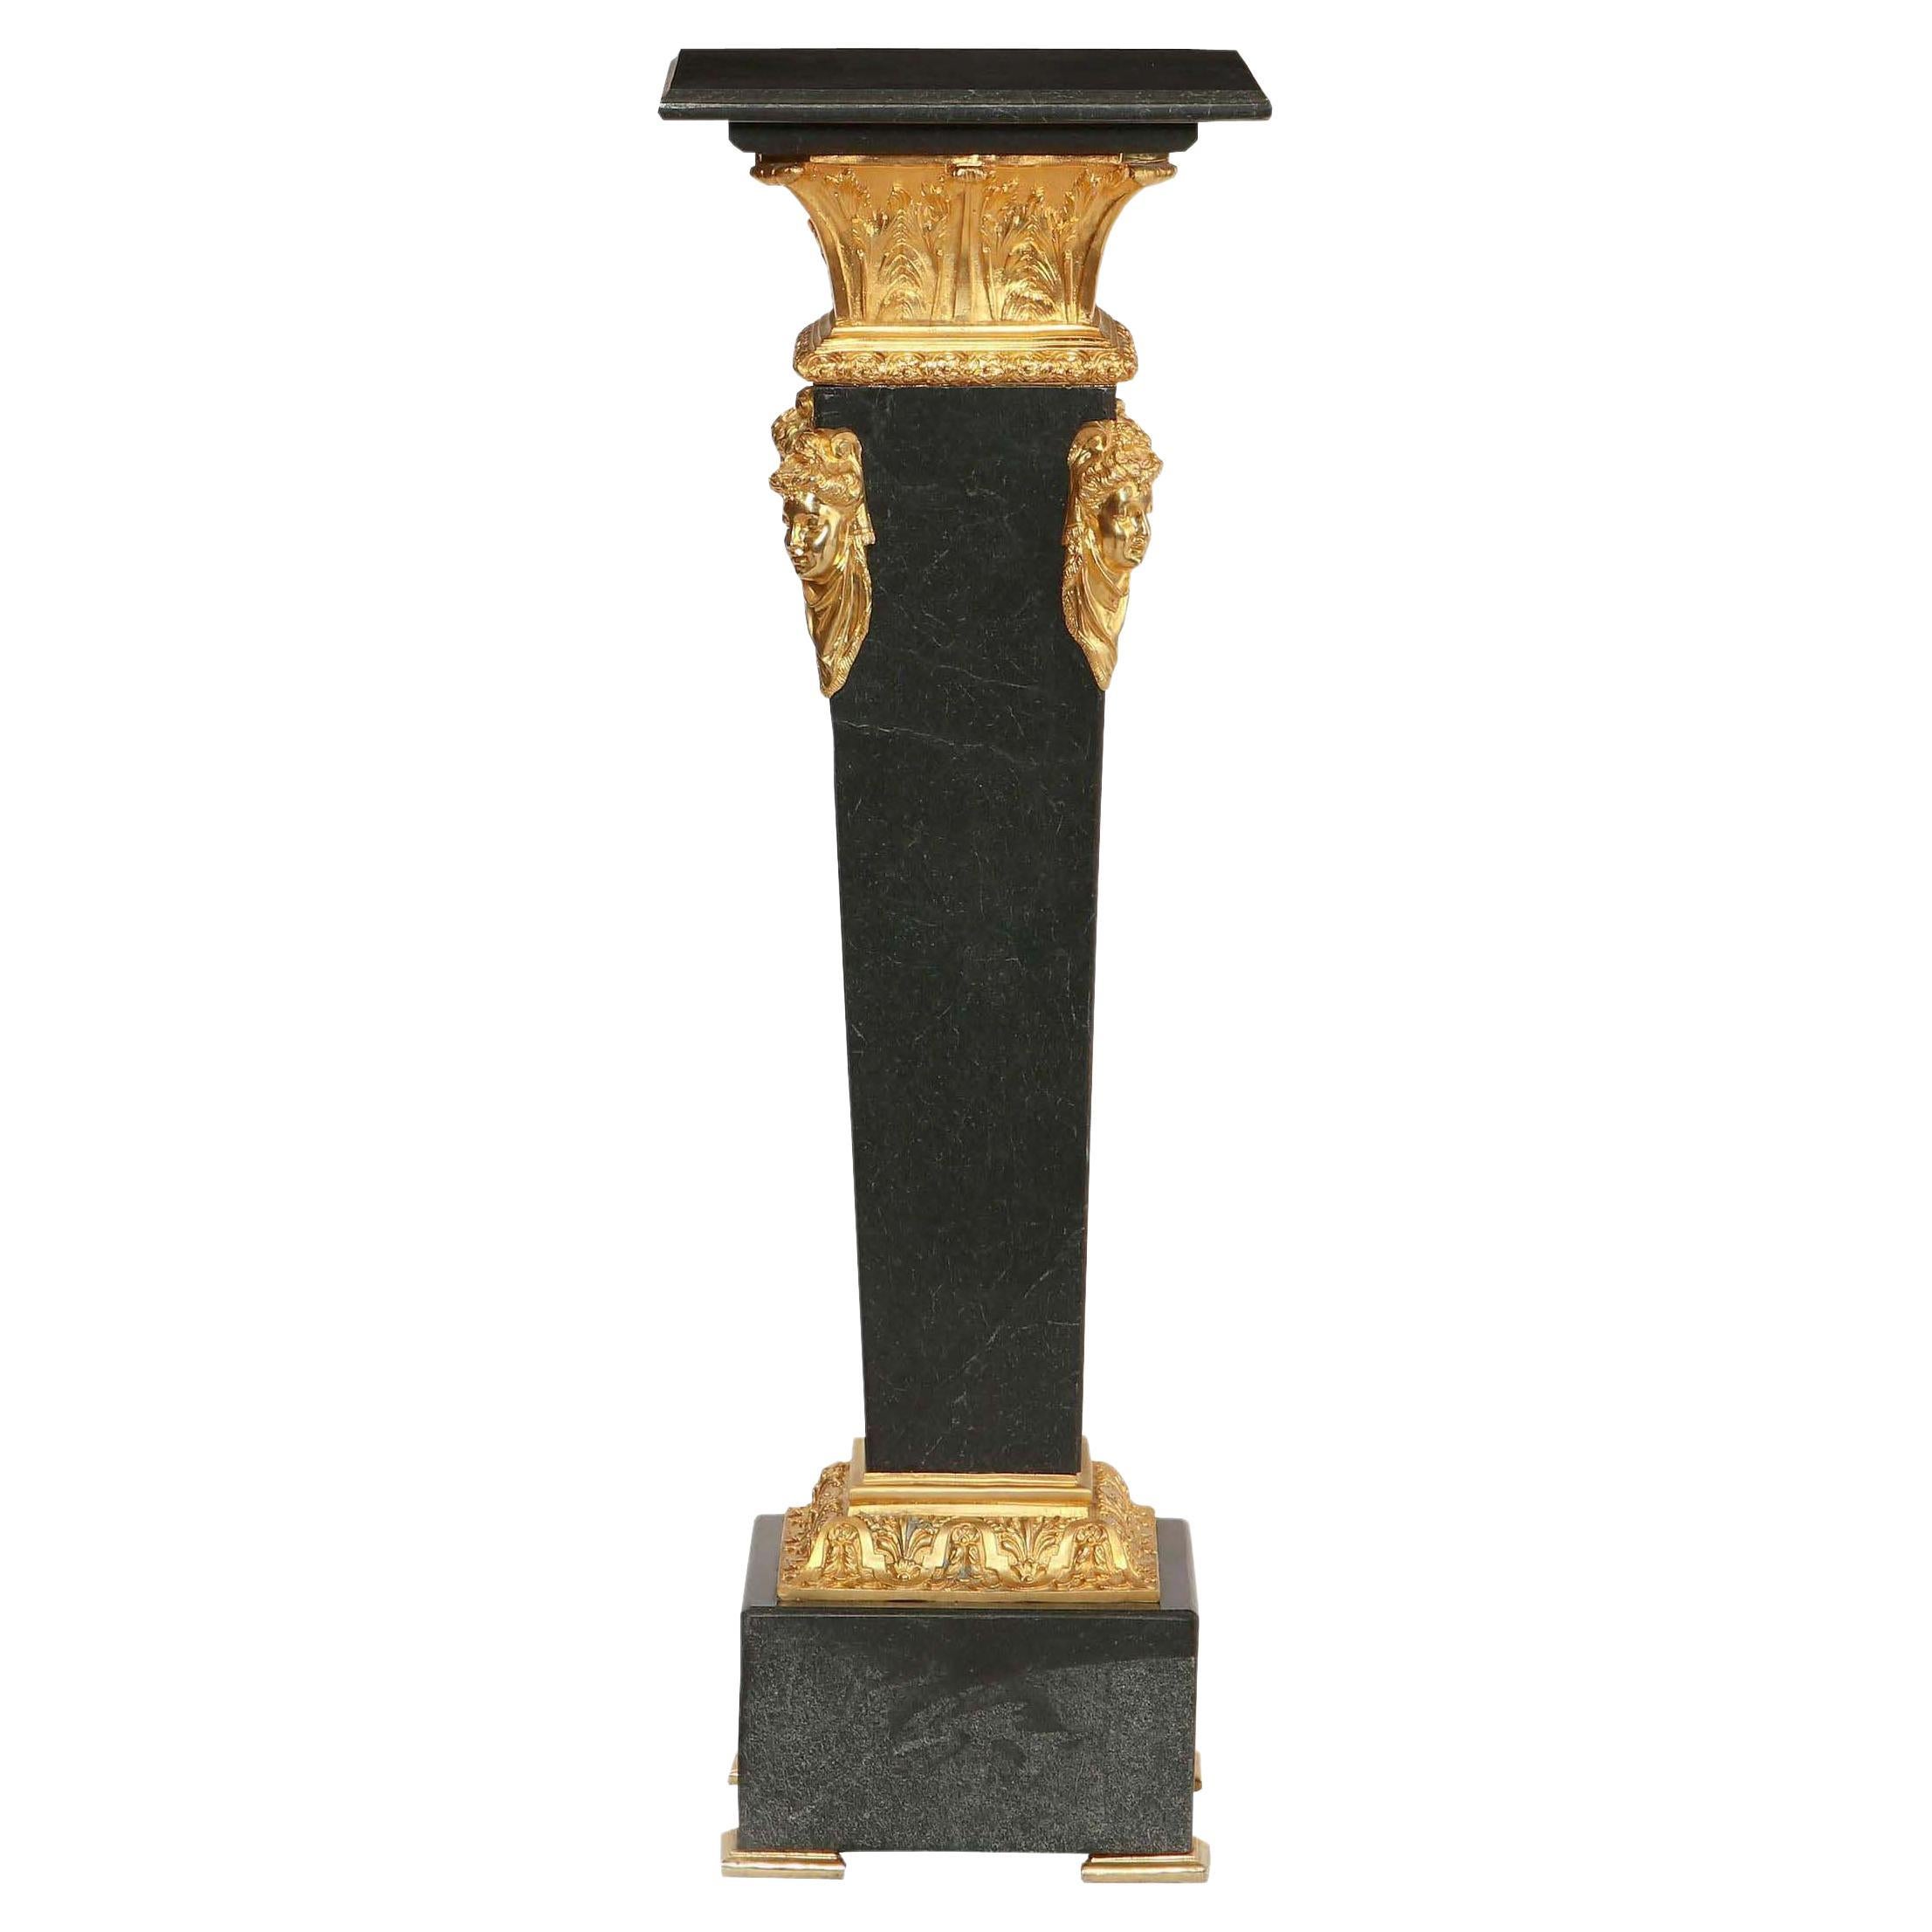 Neoclassical Style Marble Pedestal, Modern